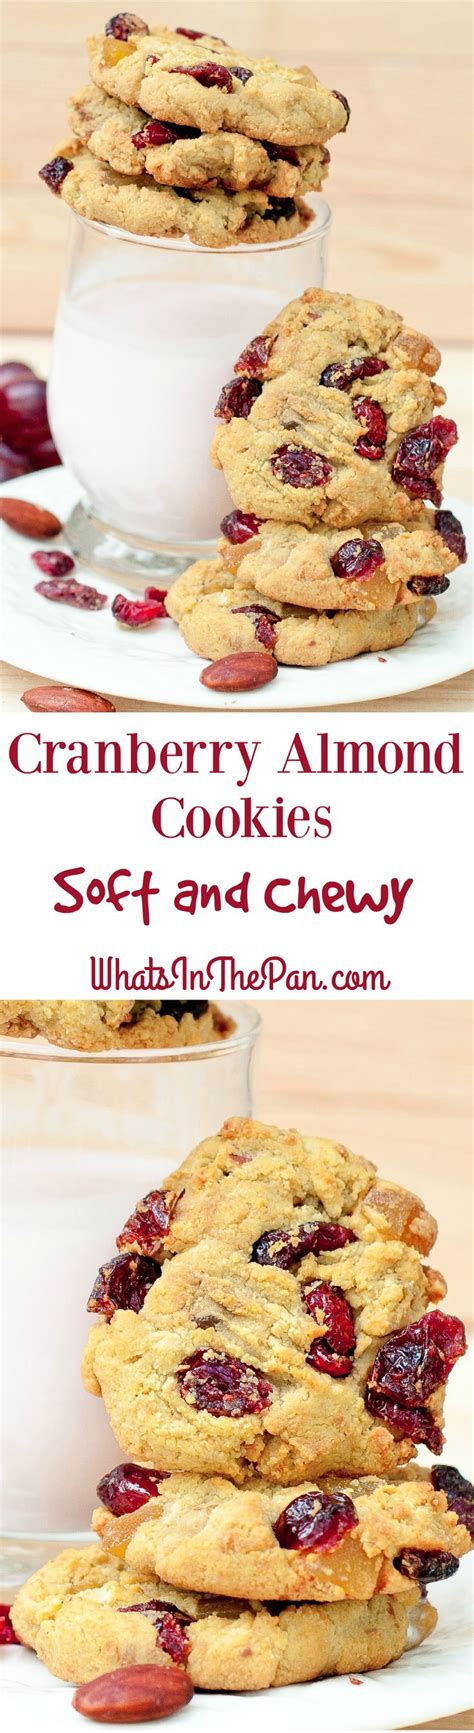 Almond flour is made from blanched almonds (almonds with their skins removed) and is ground very finely. Made with Bob's Red Mill Almond Flour | Sugar free cookies ...